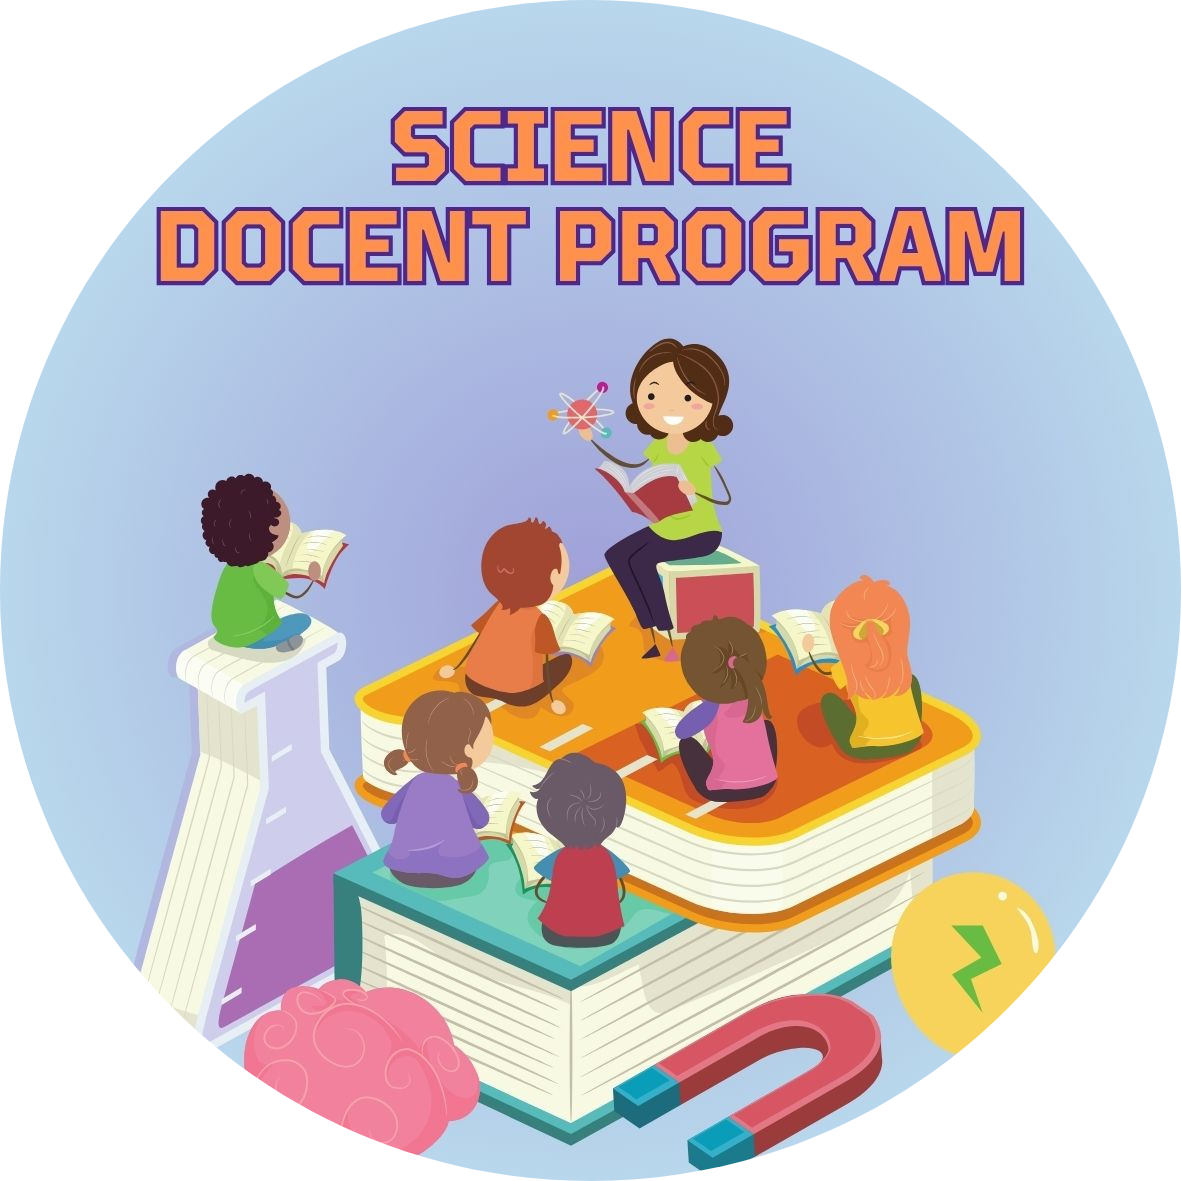 Science Docent